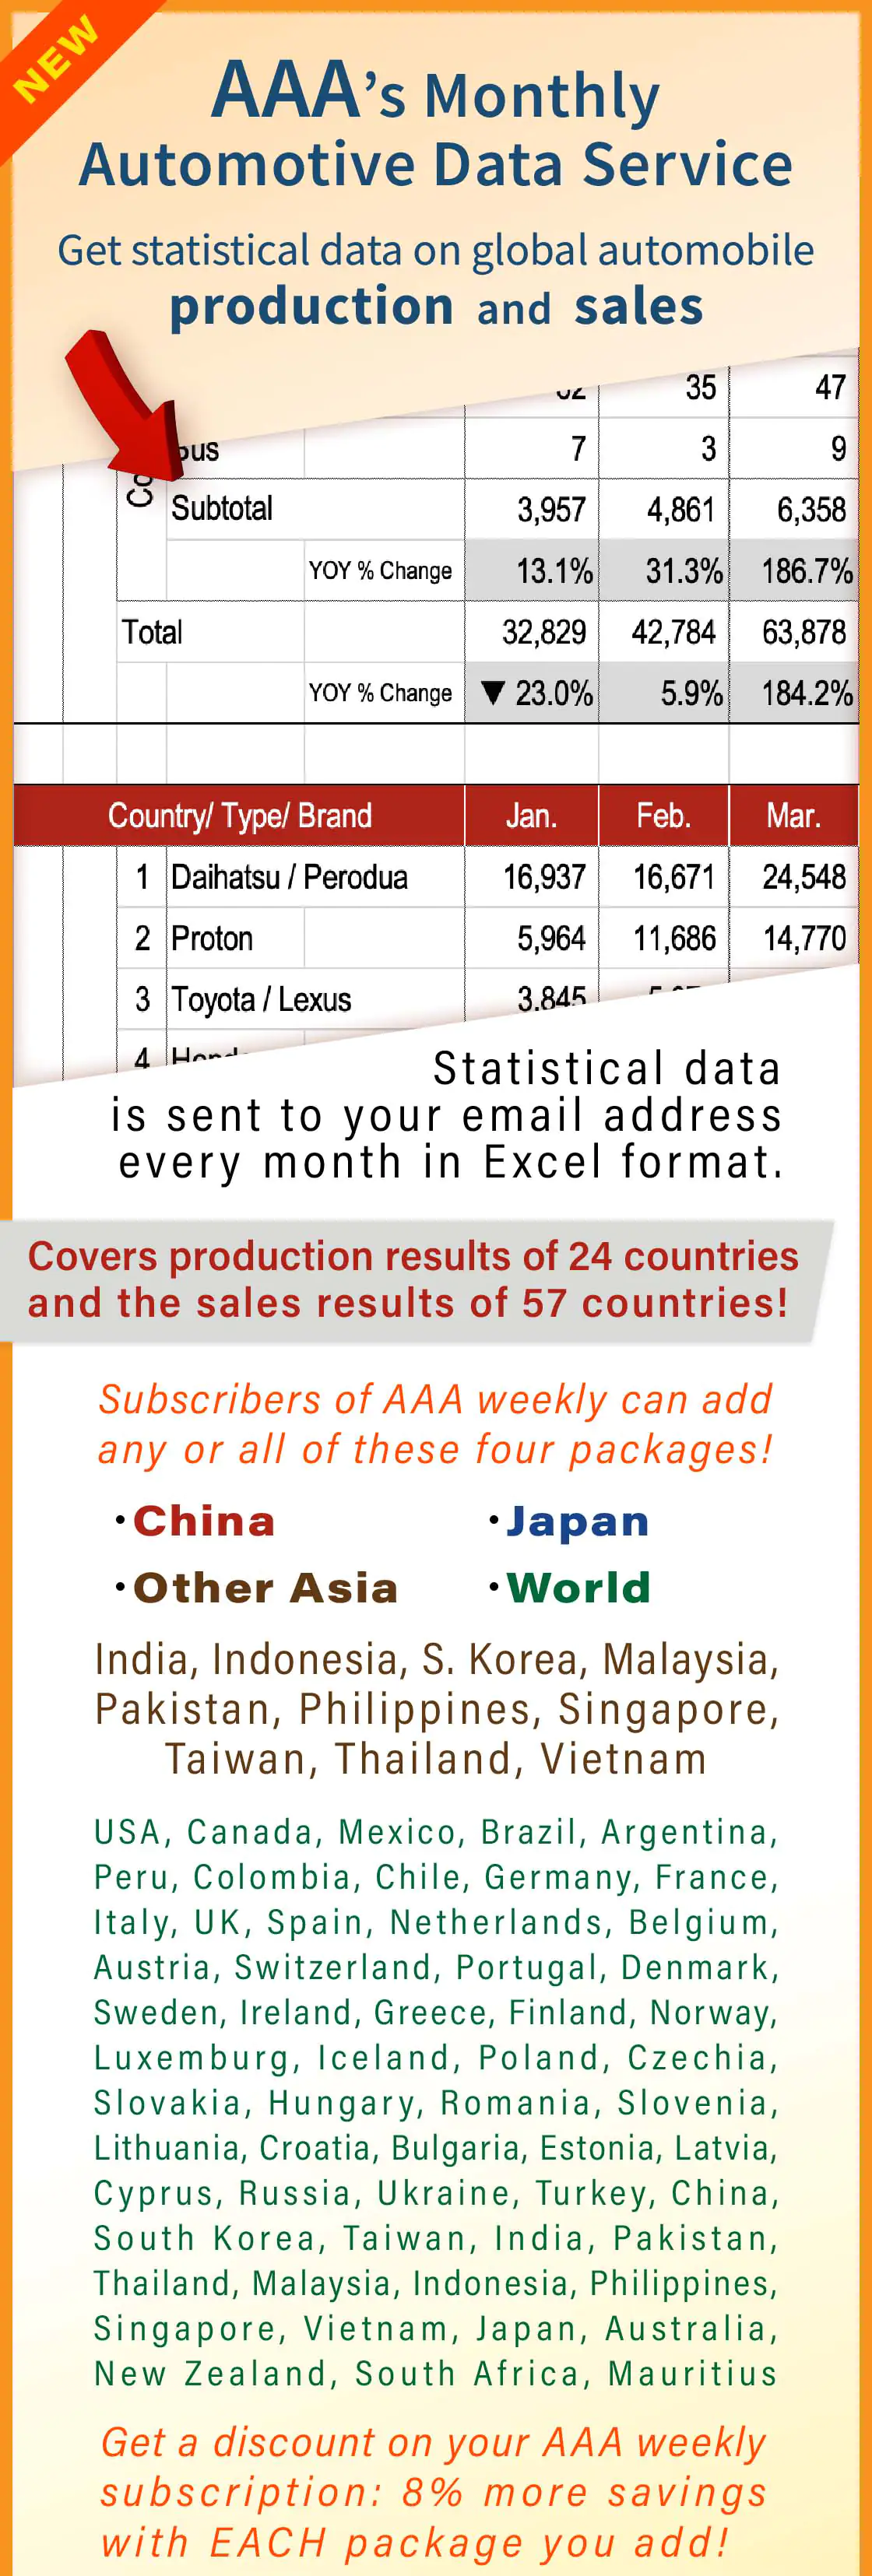 AAA's monthly statistical data - click for details about our automotive data service - production and sales statistics